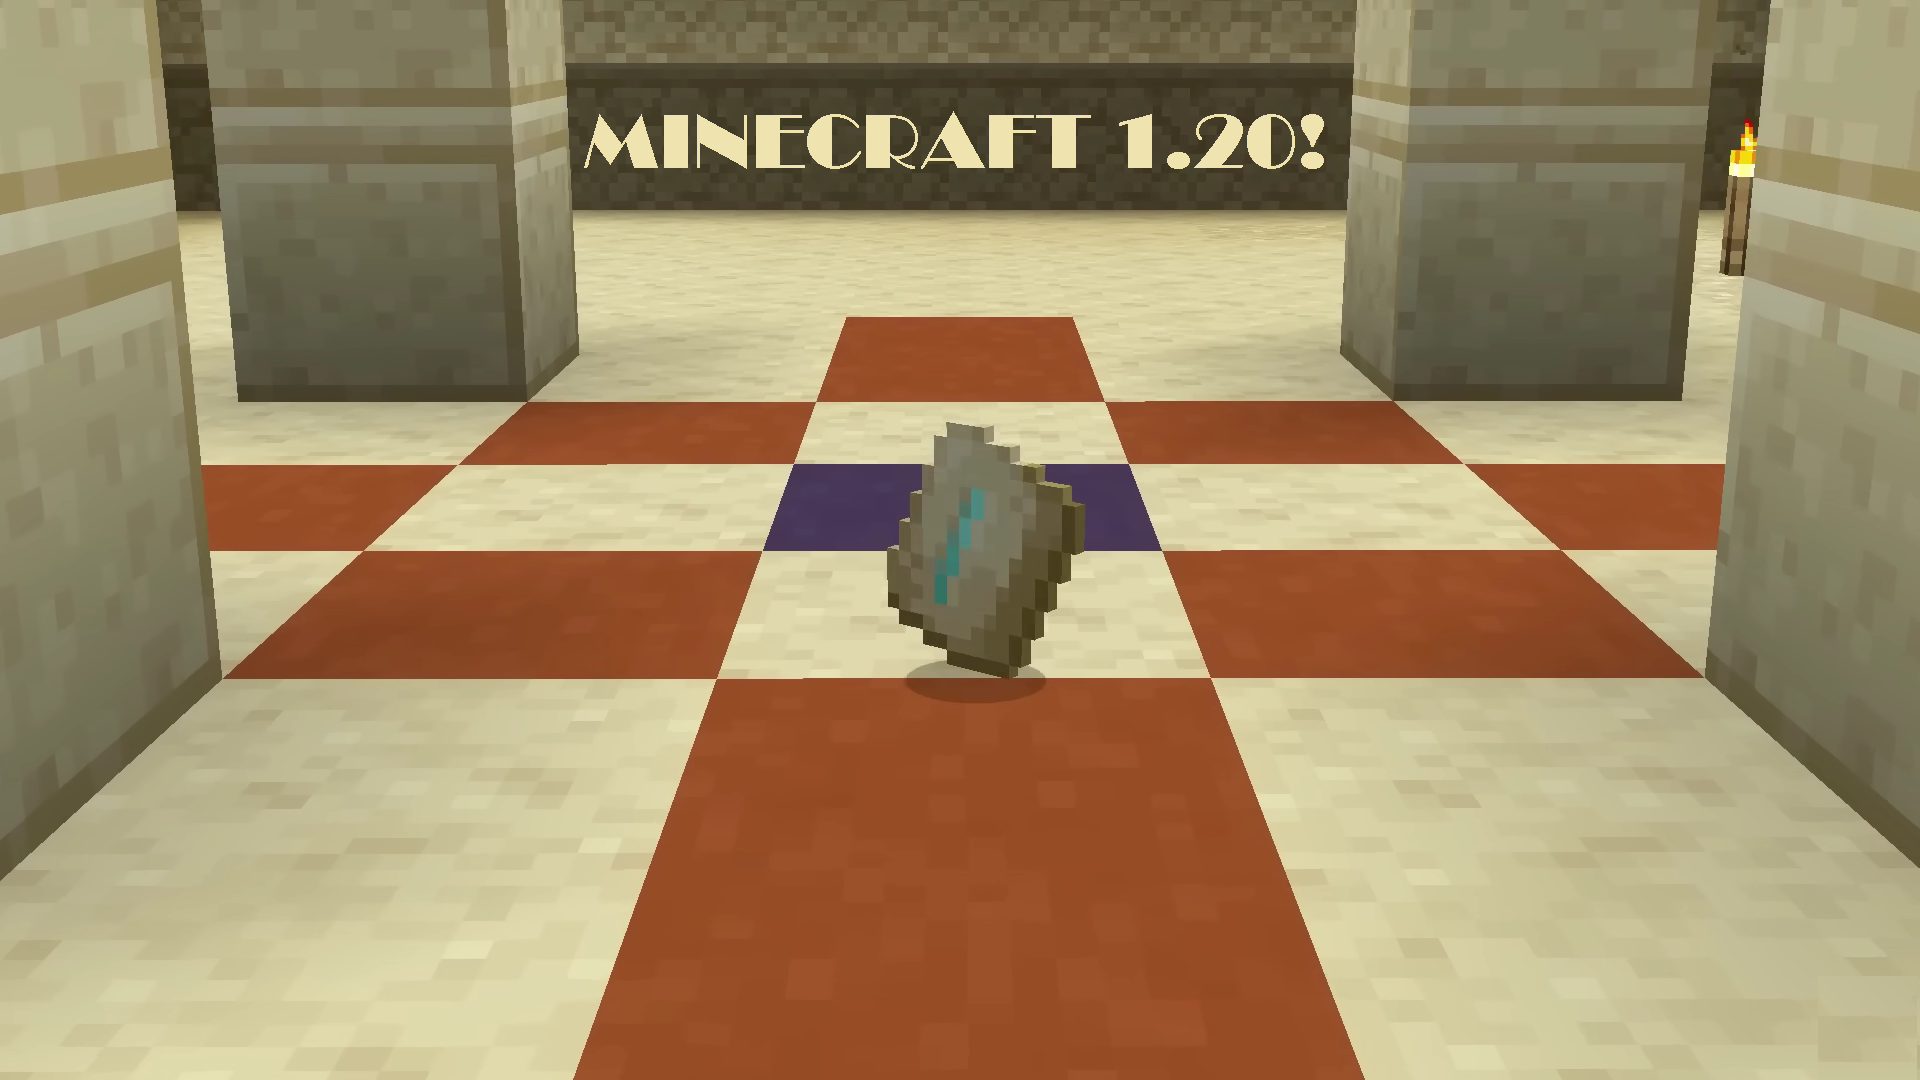 5 Unexpected Features To Be Added in Minecraft 1.20